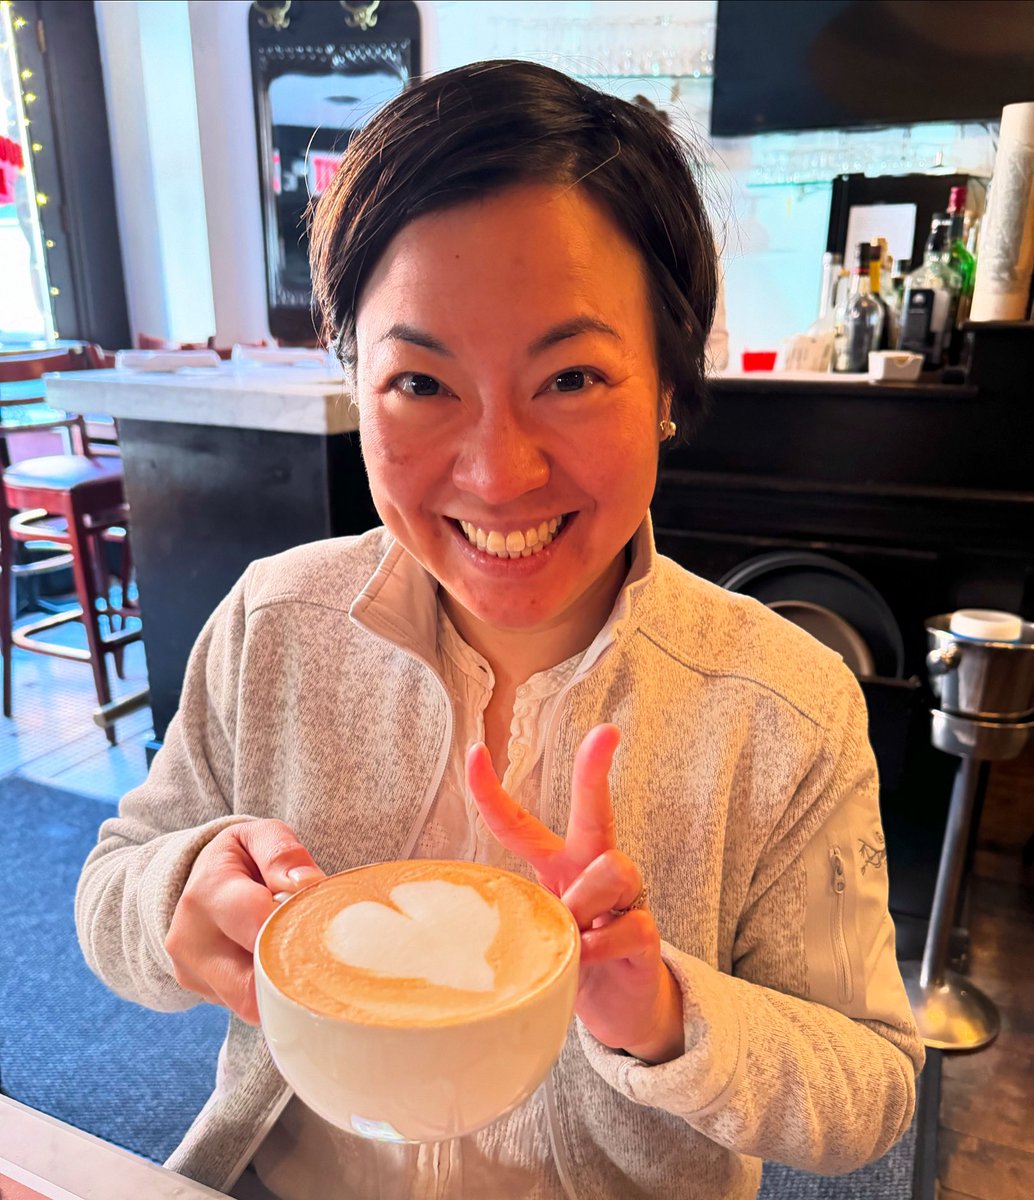 Portrait of our very dear guest, the fabulous @dtanhkg , having a chill Sunday with a perfect @mannysbistrony café latte. (Made with delicious @misceladoro beans.) This could be you! Come visit … ☕️
#mannysbistro #mannysbistrony #latte #coffee #nyc #newyork #newyorkcity #uws